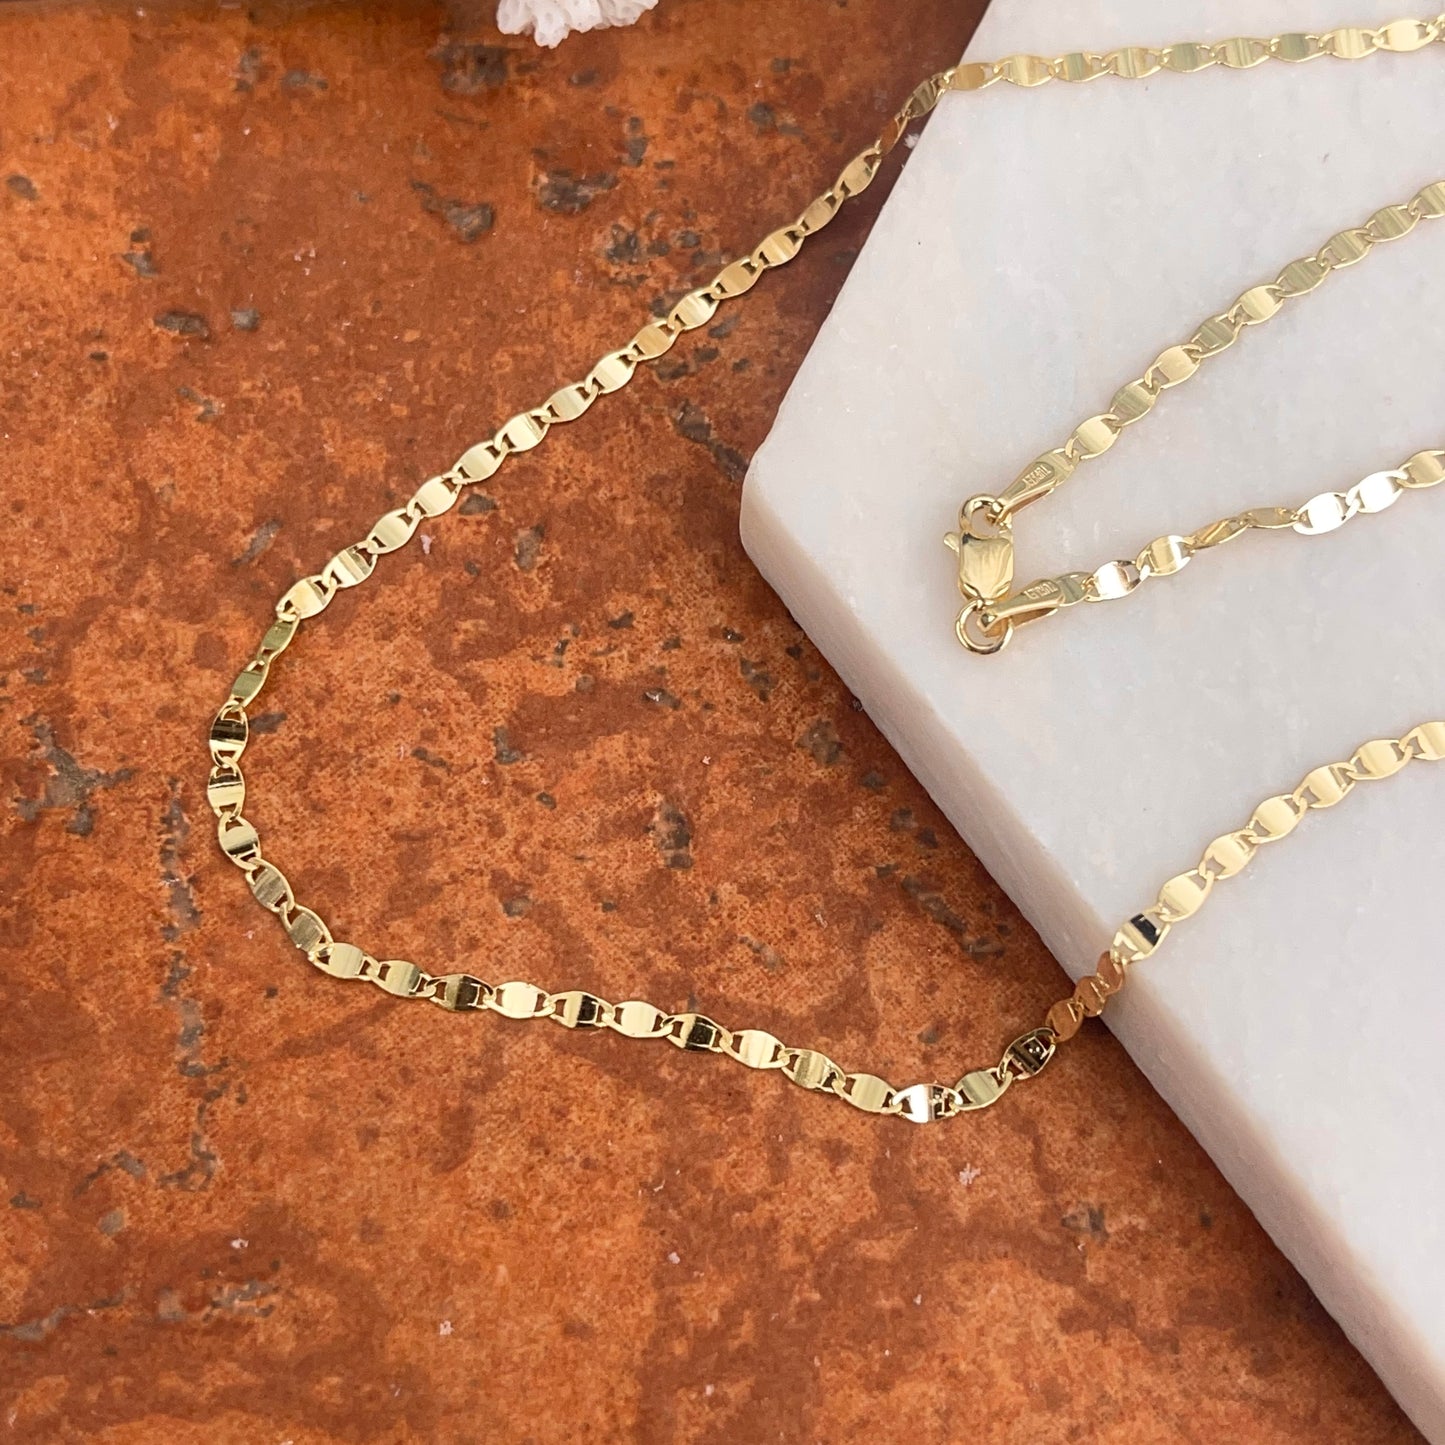 14K Gold Mirror Chain Link Necklace 14K Yellow Gold / 16